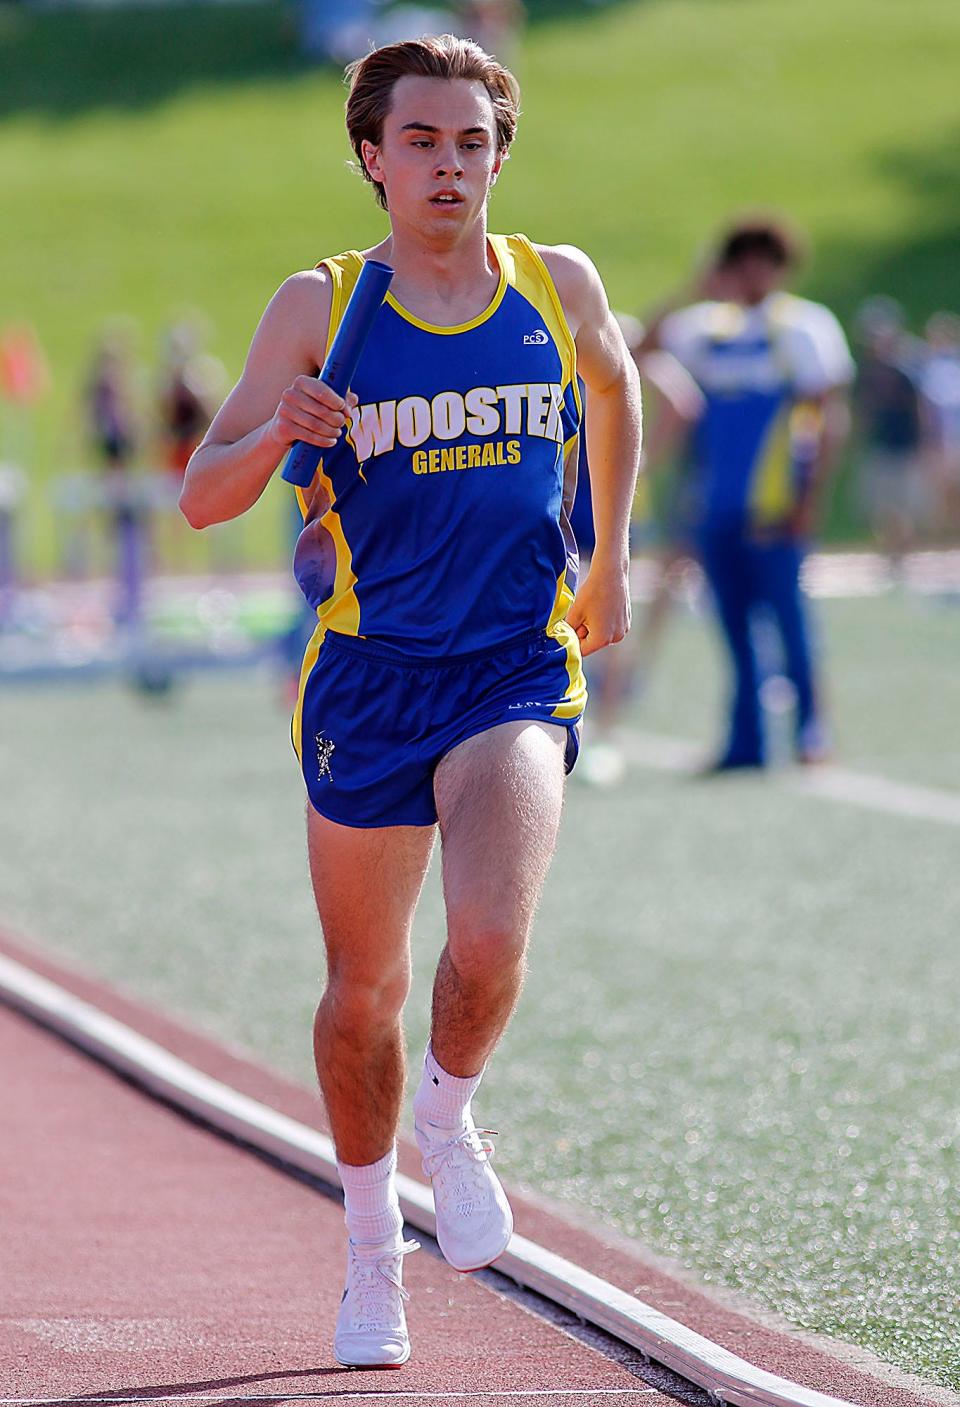 Wooster High School's Ashton Dunlap competes in the 4x800 meter relay at the Ohio Cardinal Conference track meet held at Ashland University on Friday, May 13, 2022. TOM E. PUSKAR/TIMES-GAZETTE.COM